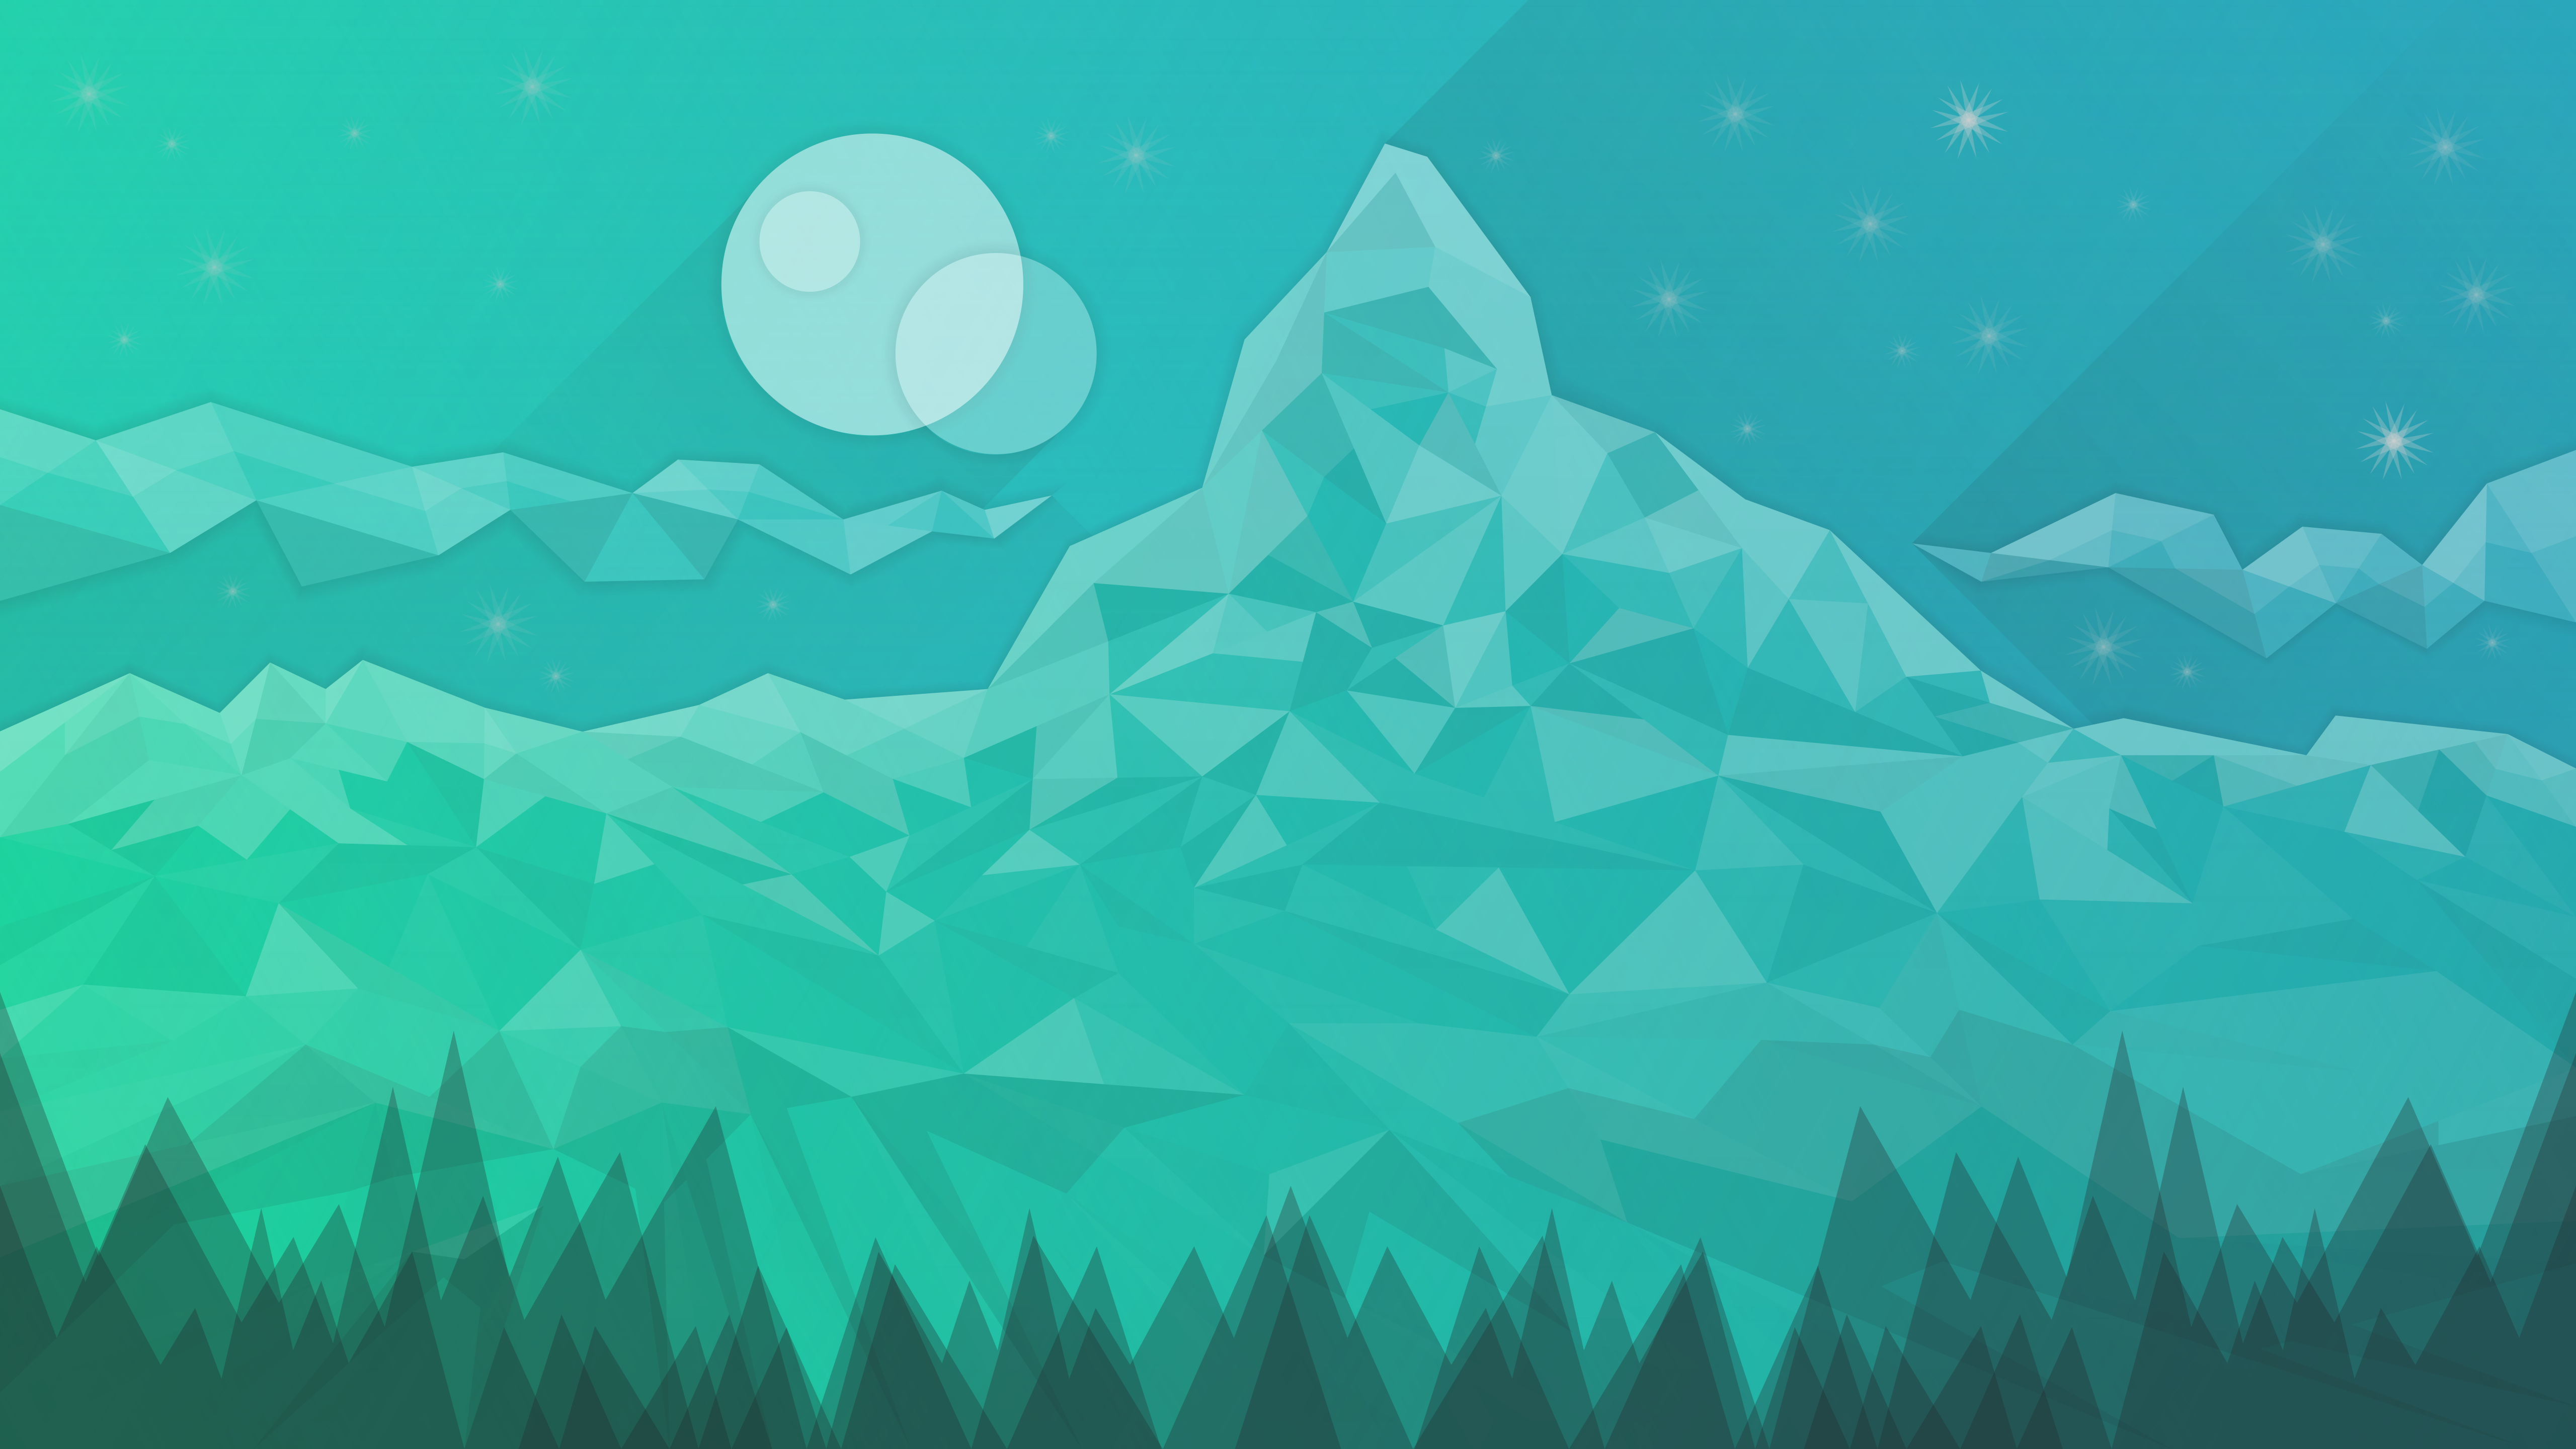 Starry Dusk Wallpapers